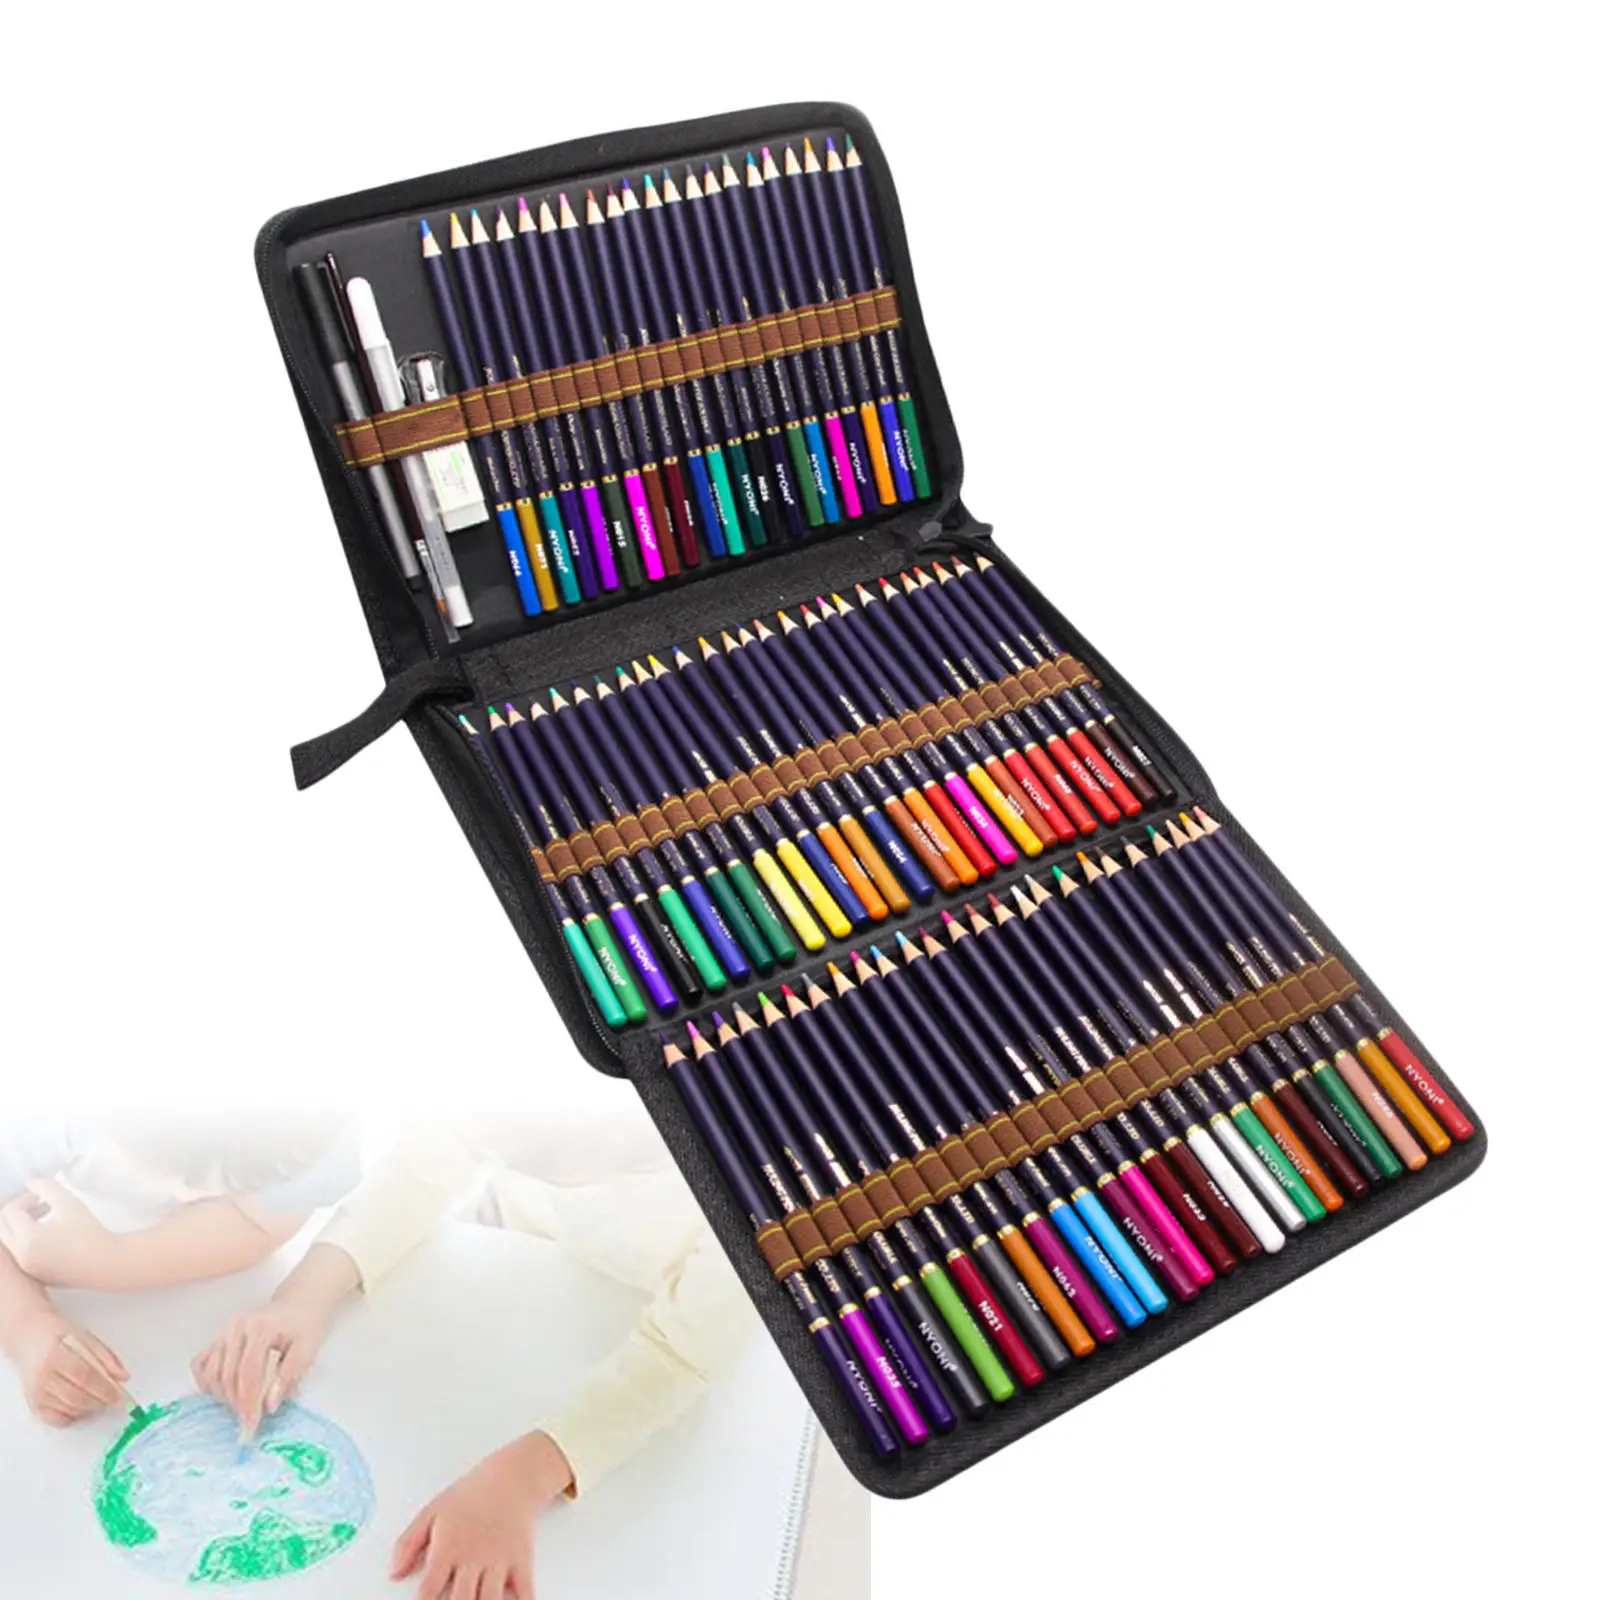 Professional Premium Colored Pencils 72 PCS Assorted Colors Set High Quality Artist Painting Drawing for Adults Kids